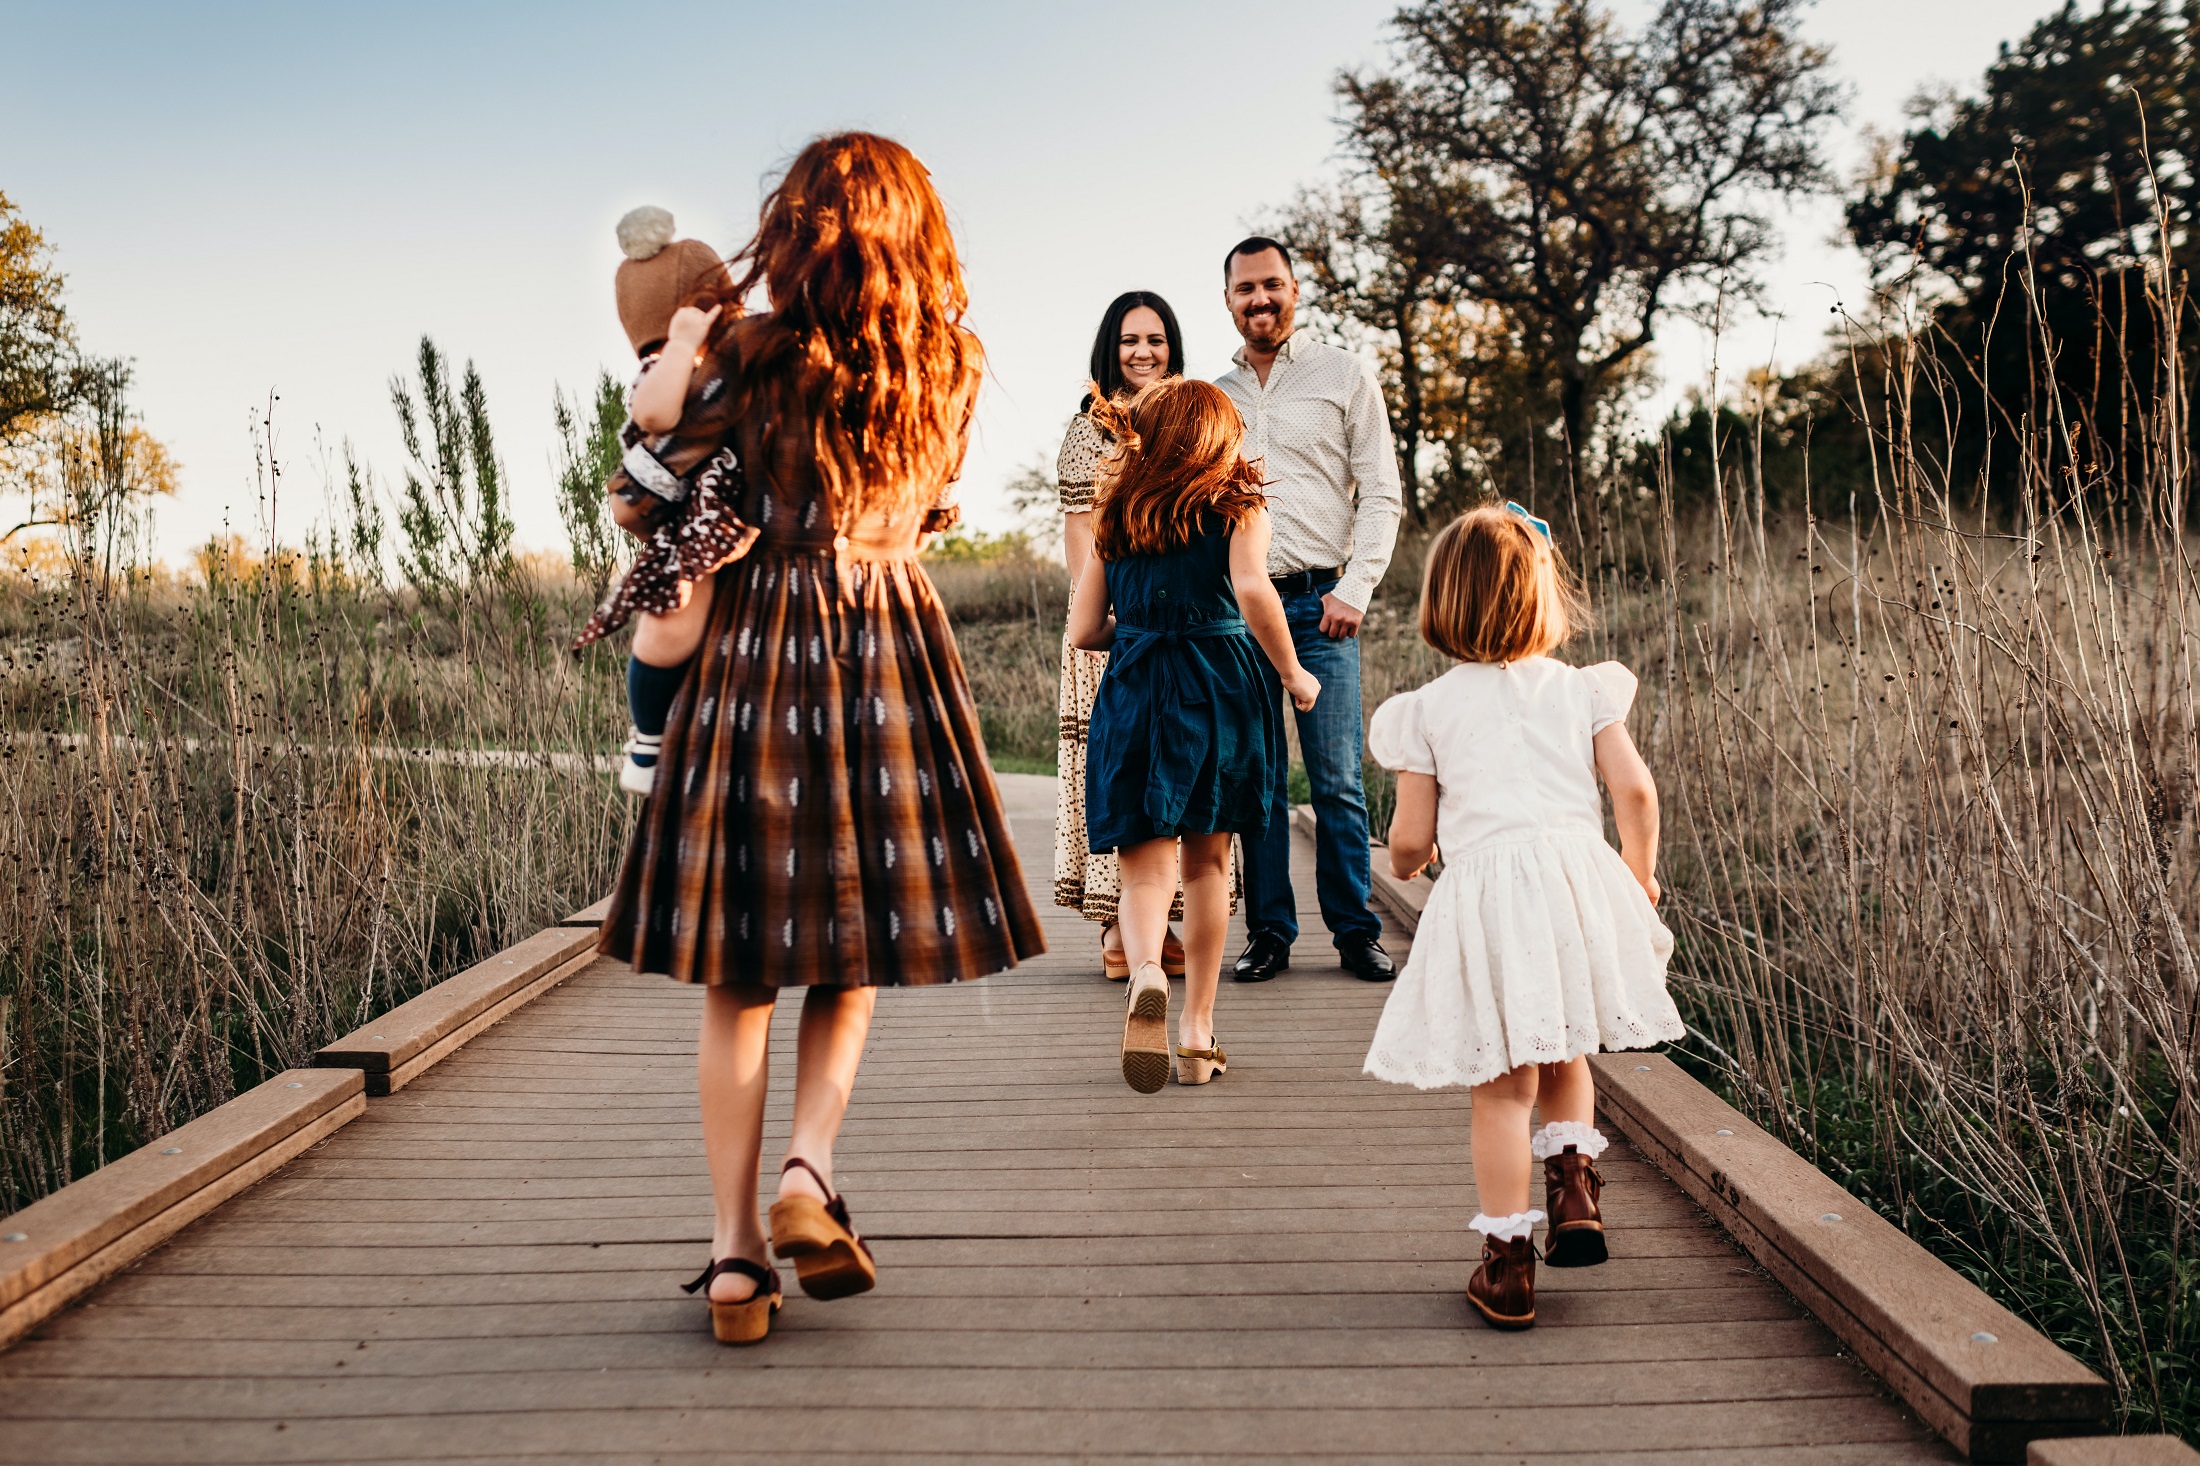 A family goes on a walk on a wooden path.